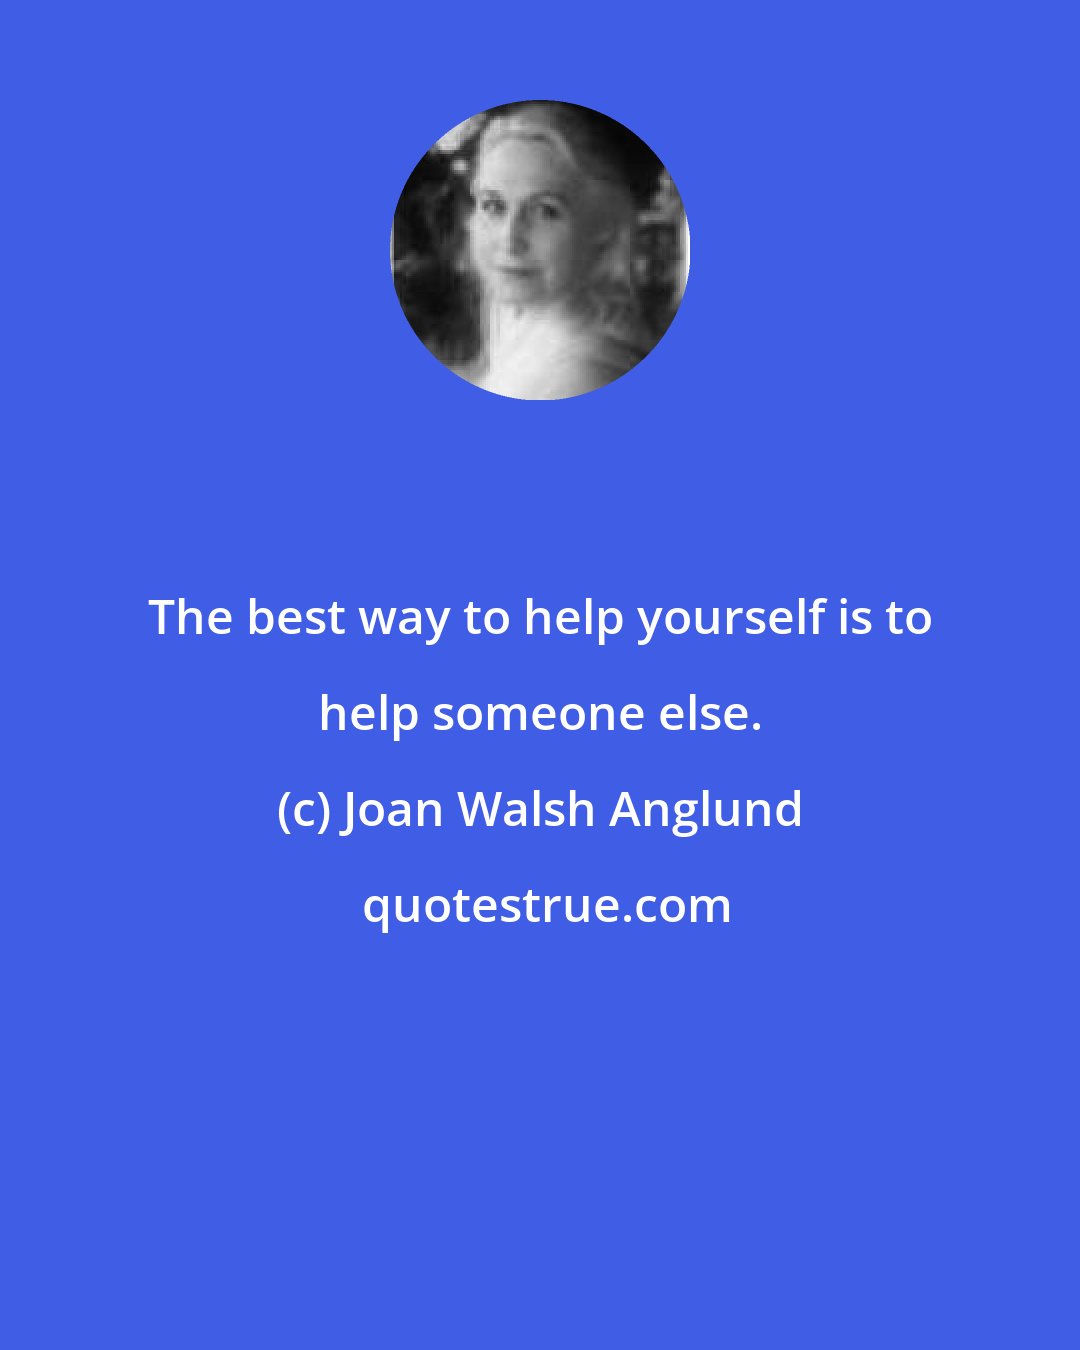 Joan Walsh Anglund: The best way to help yourself is to help someone else.